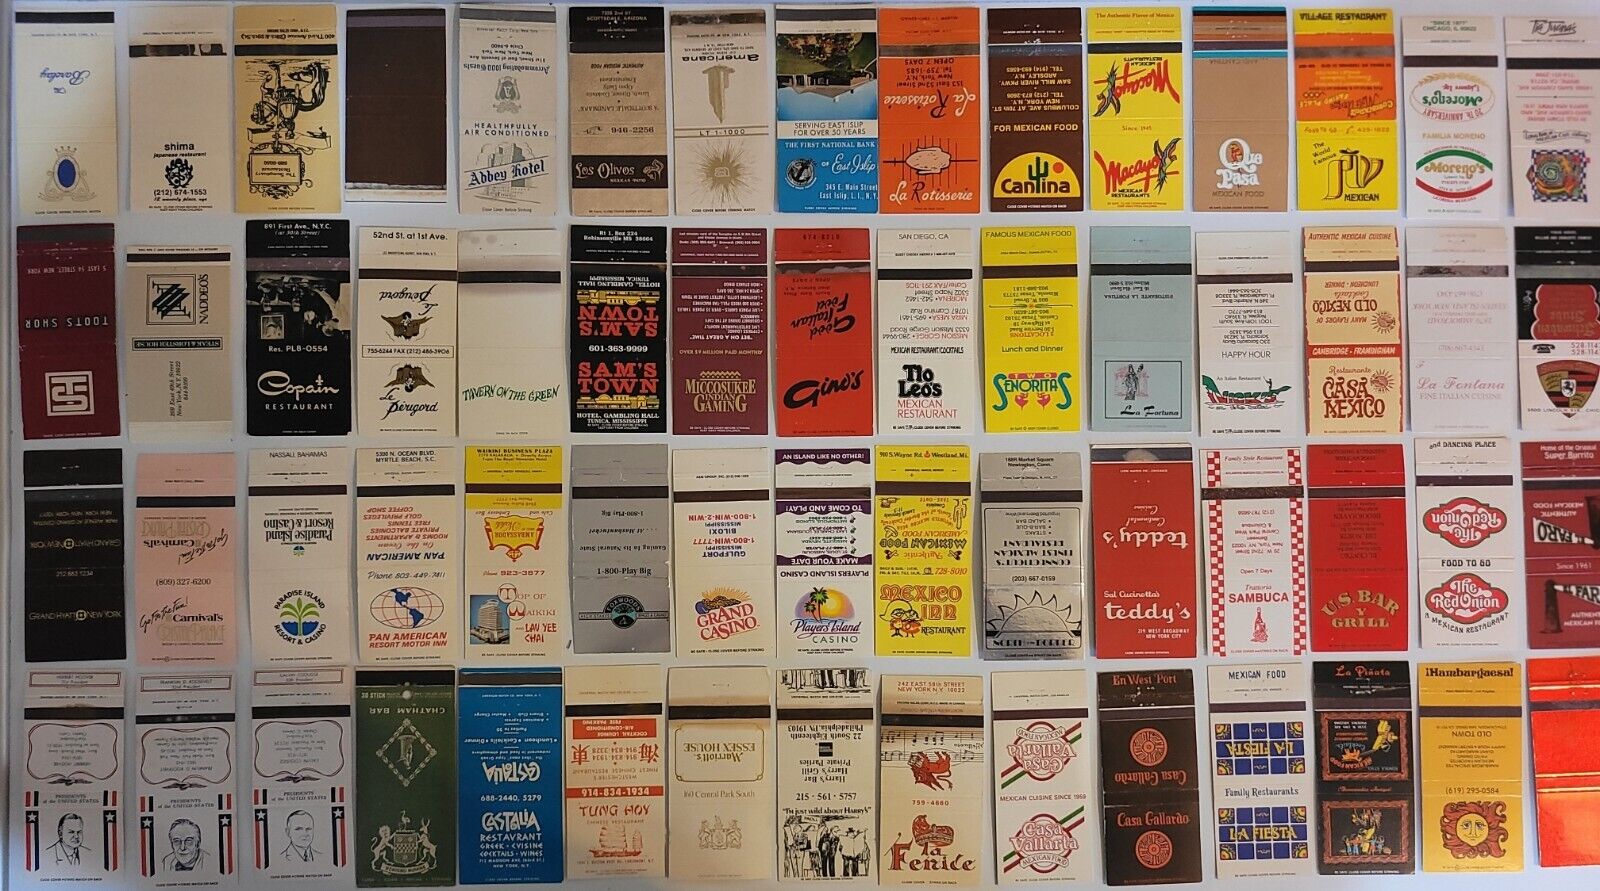 VTG MATCHBOX COLLECTION OF + 1800, USED, OPENED.